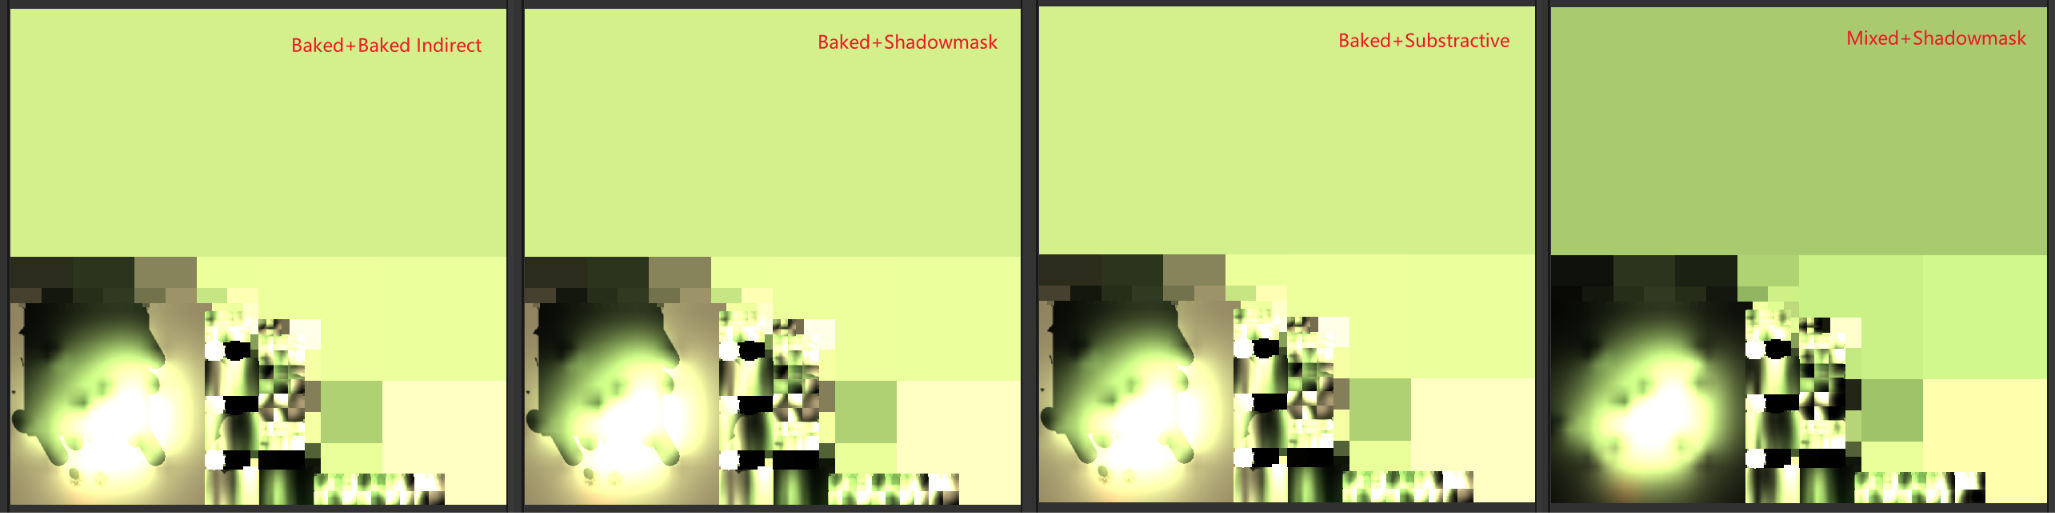 light_mode_baked_vs_mixed.png